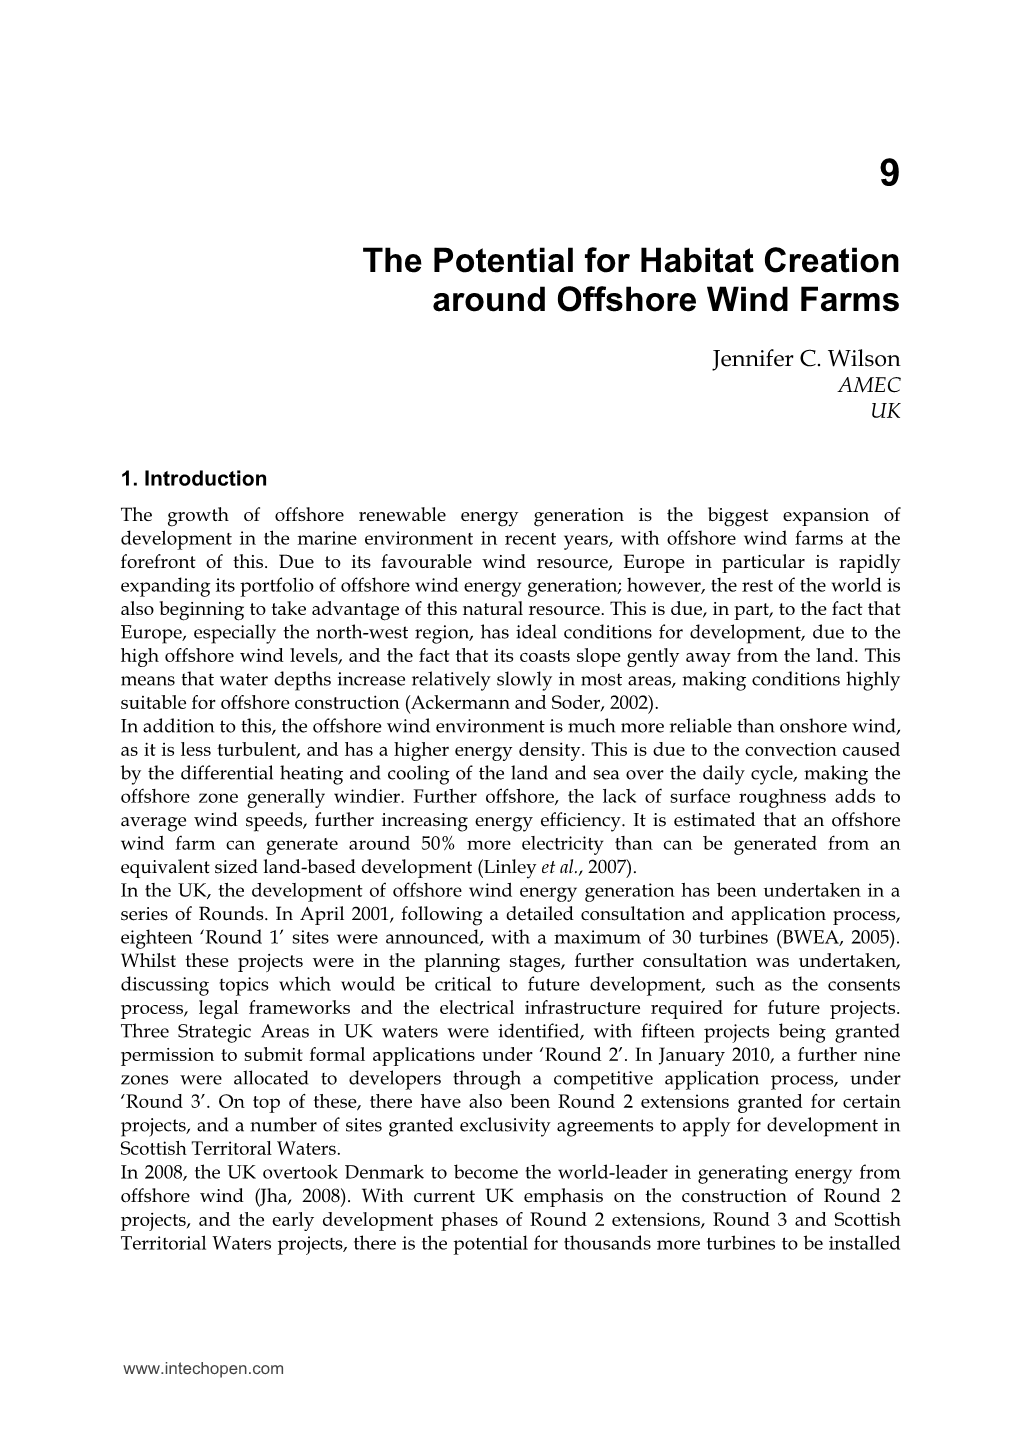 The Potential for Habitat Creation Around Offshore Wind Farms